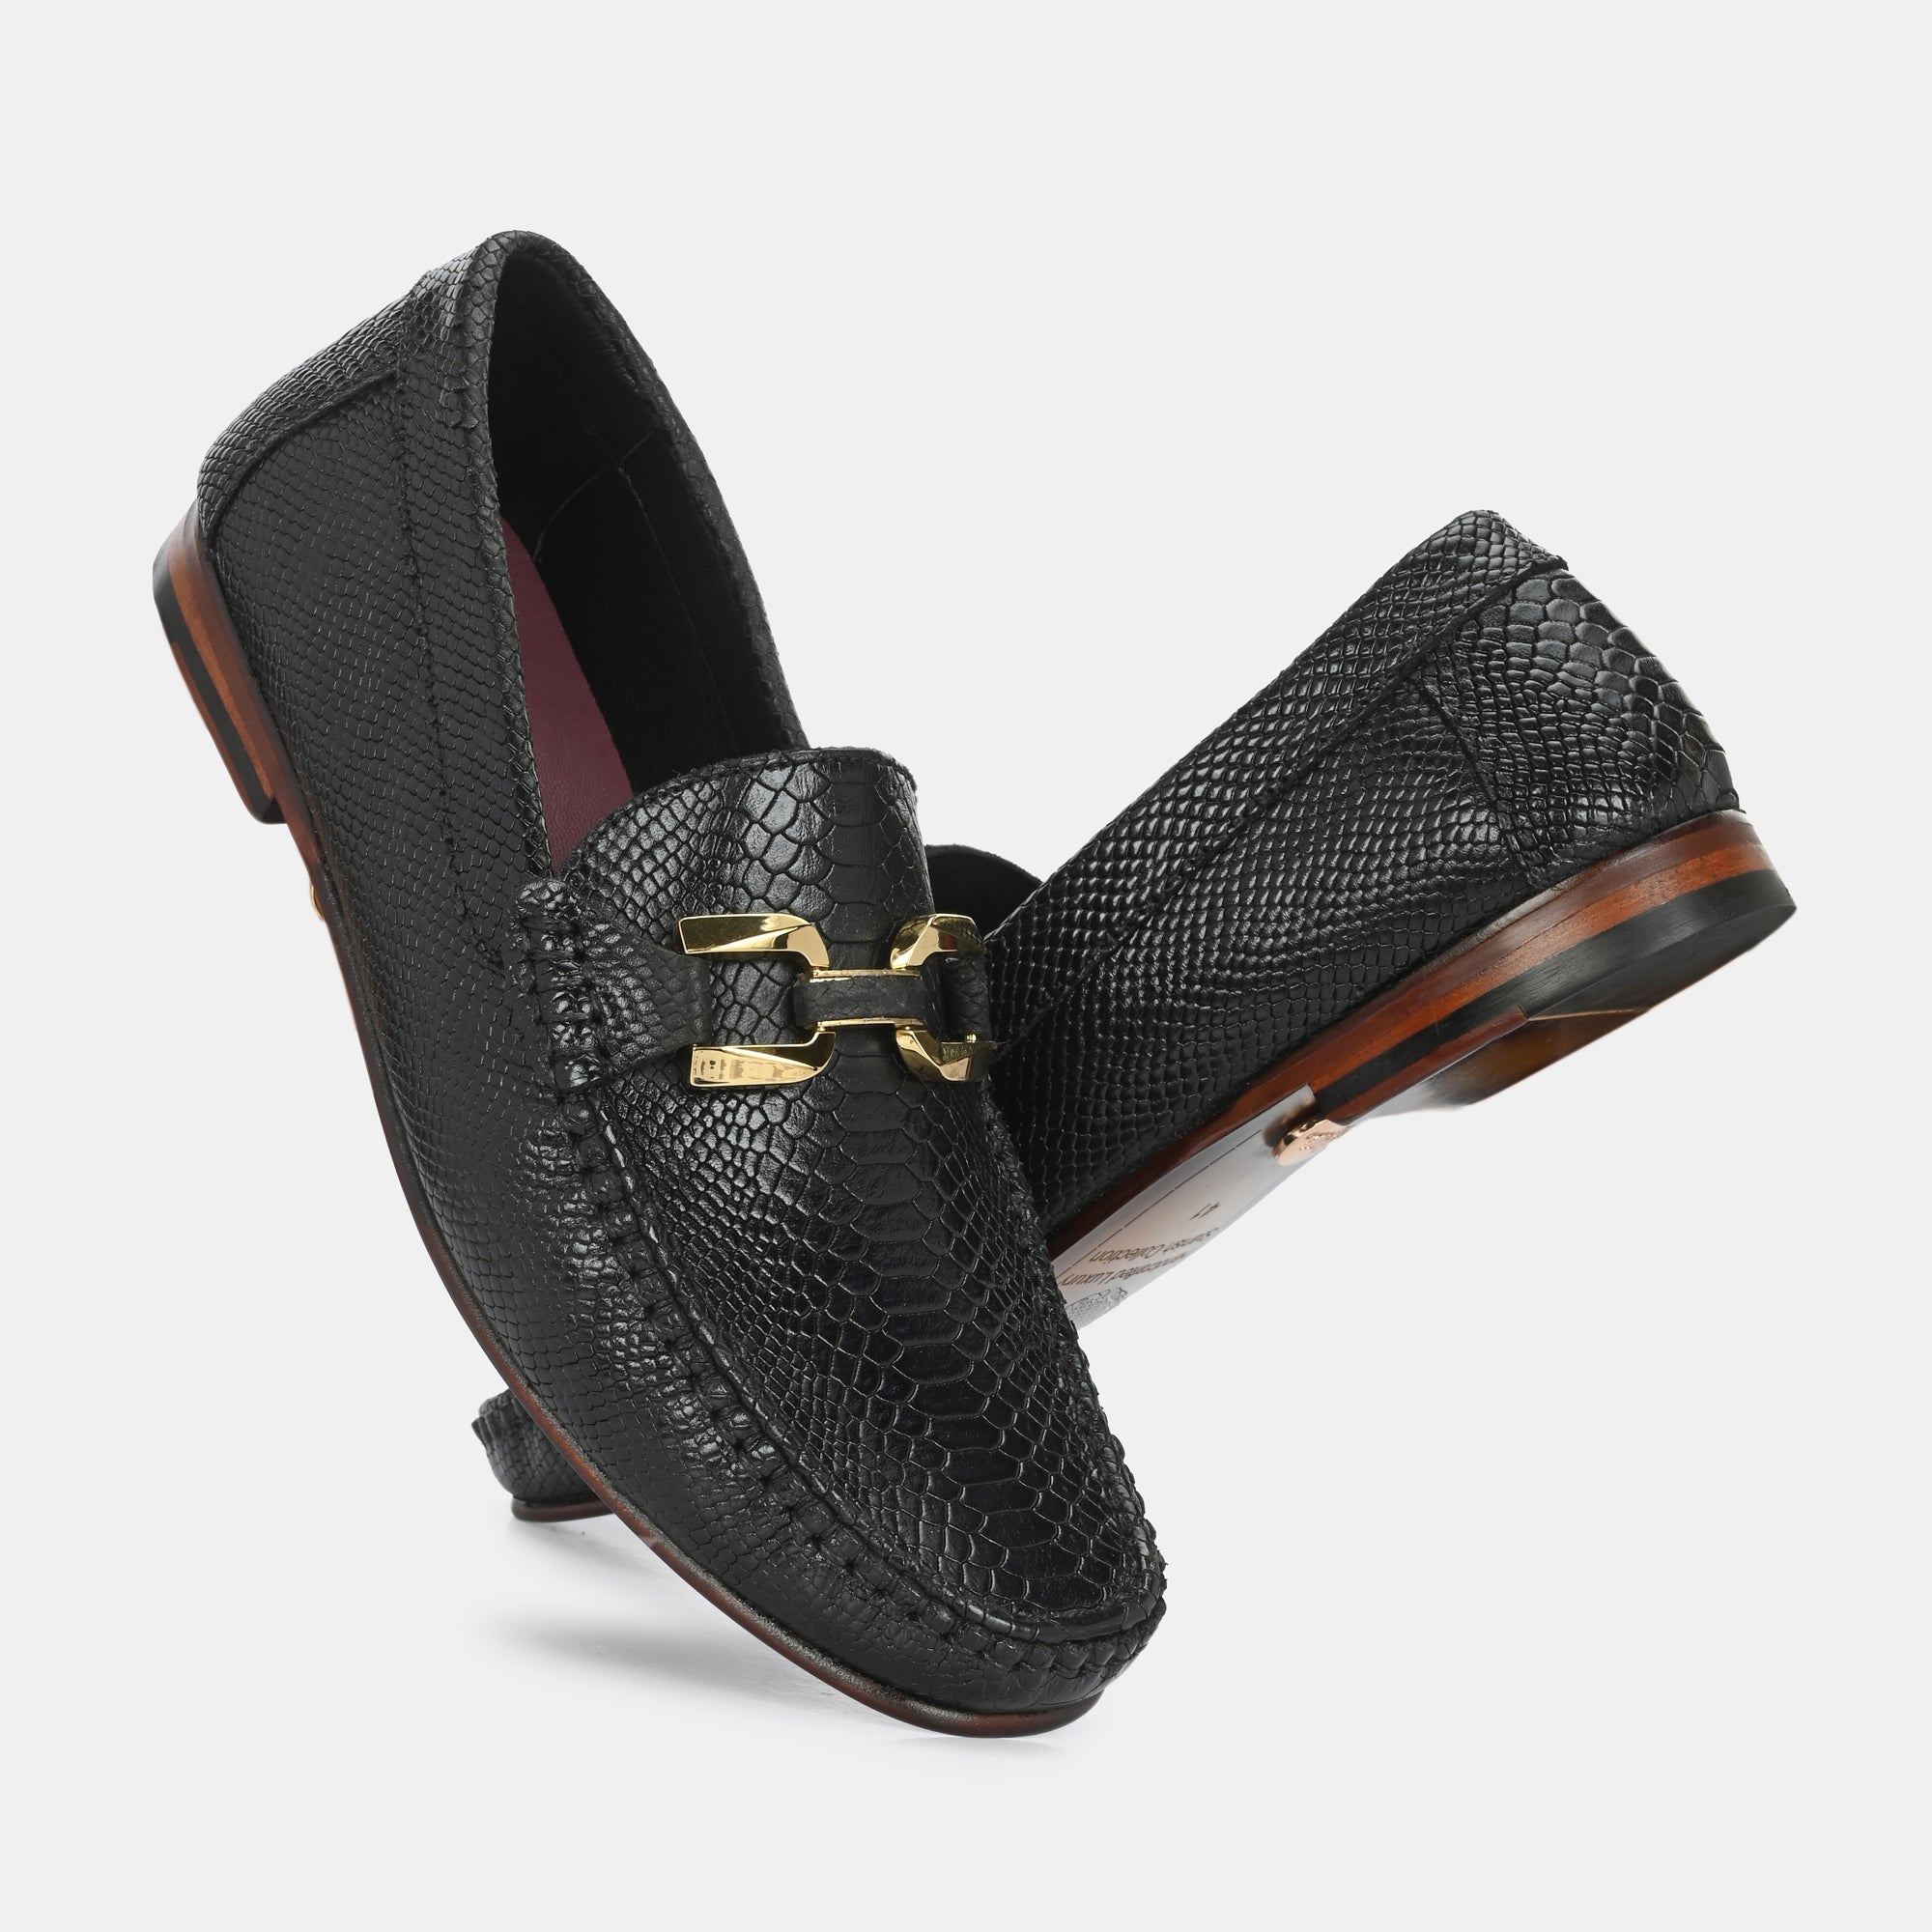 Black Imprinted Buckled Loafers by Lafattio